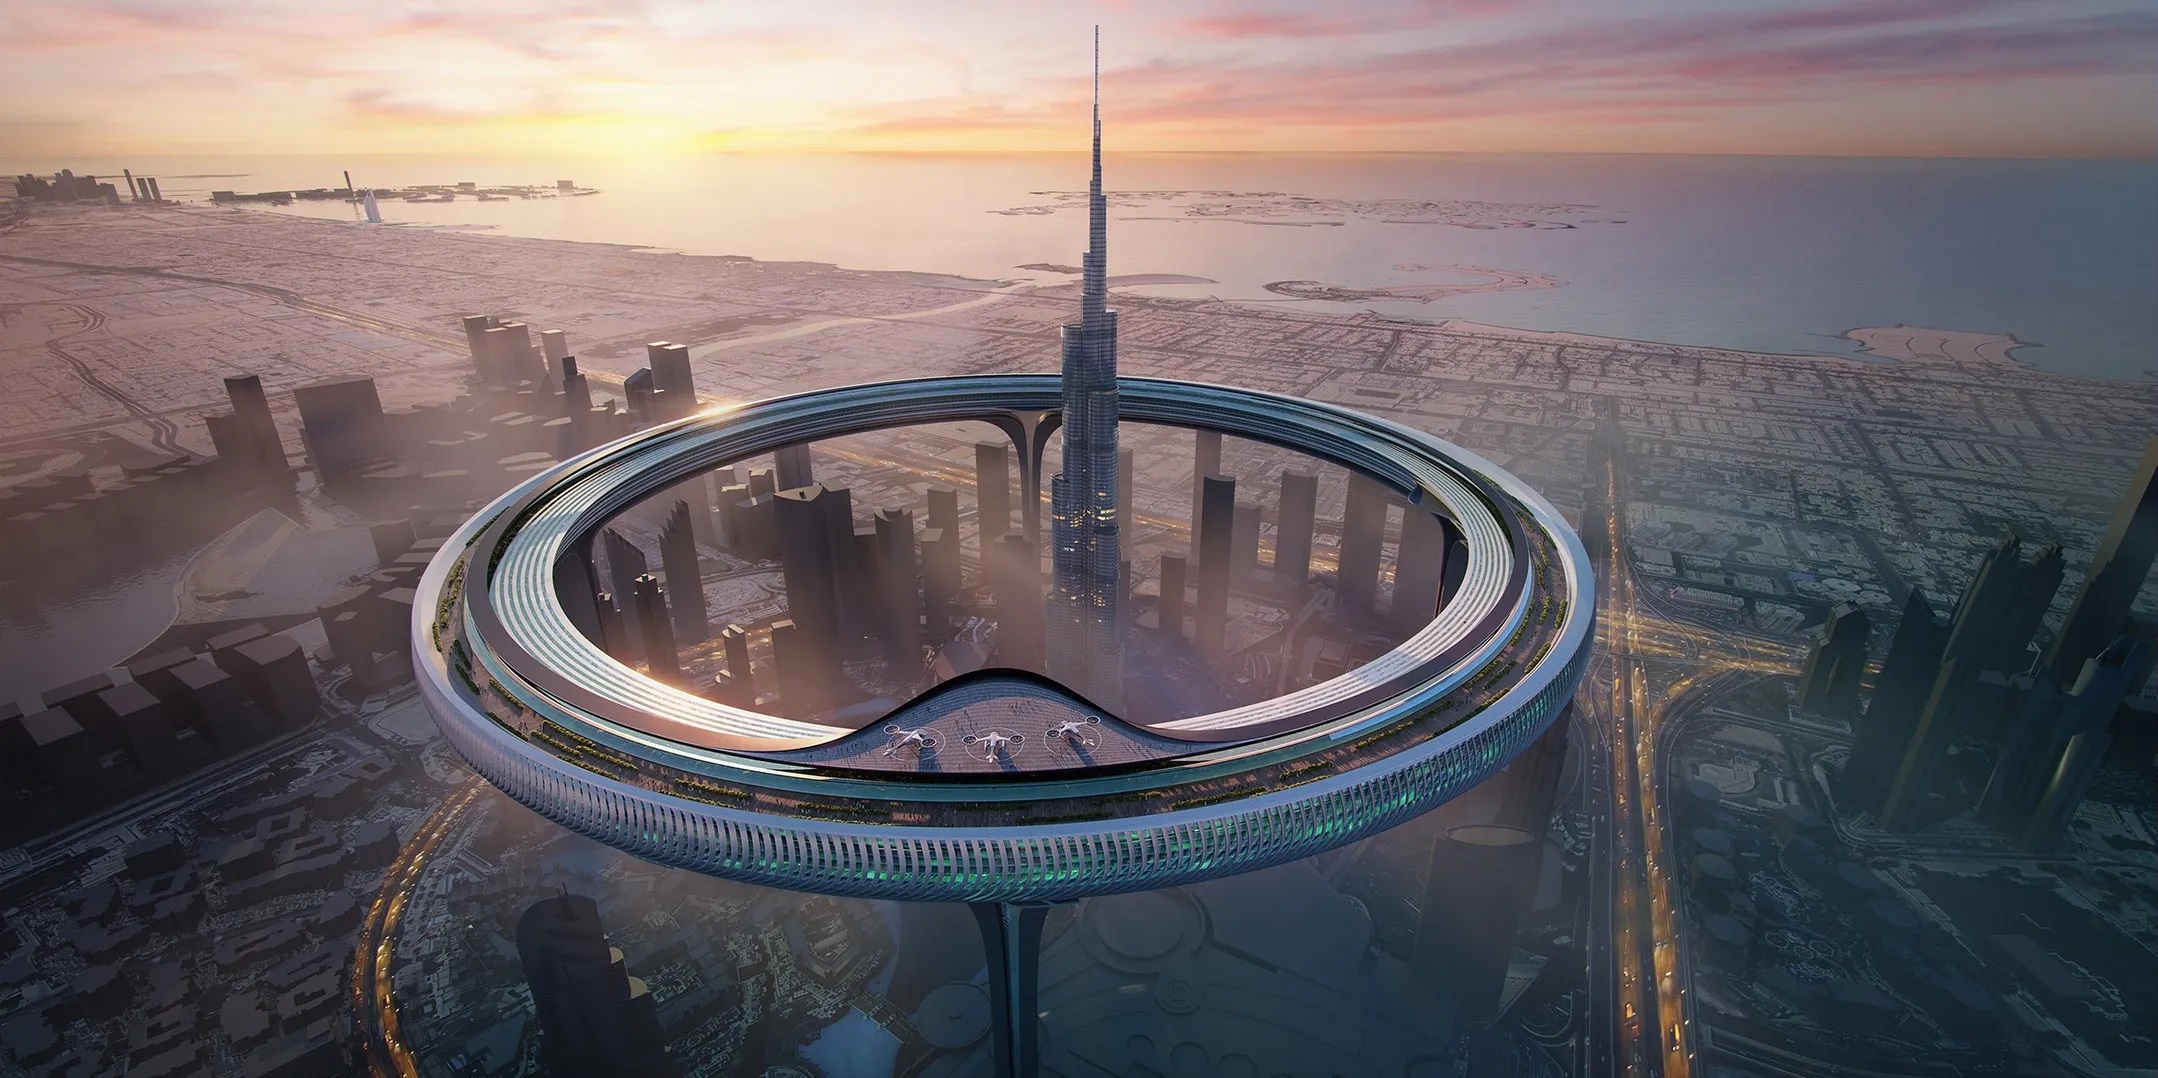 Znera Space proposes to errect a 550-meter Downtown Circle building around the world's tallest skyscraper, the Burj Khalifa